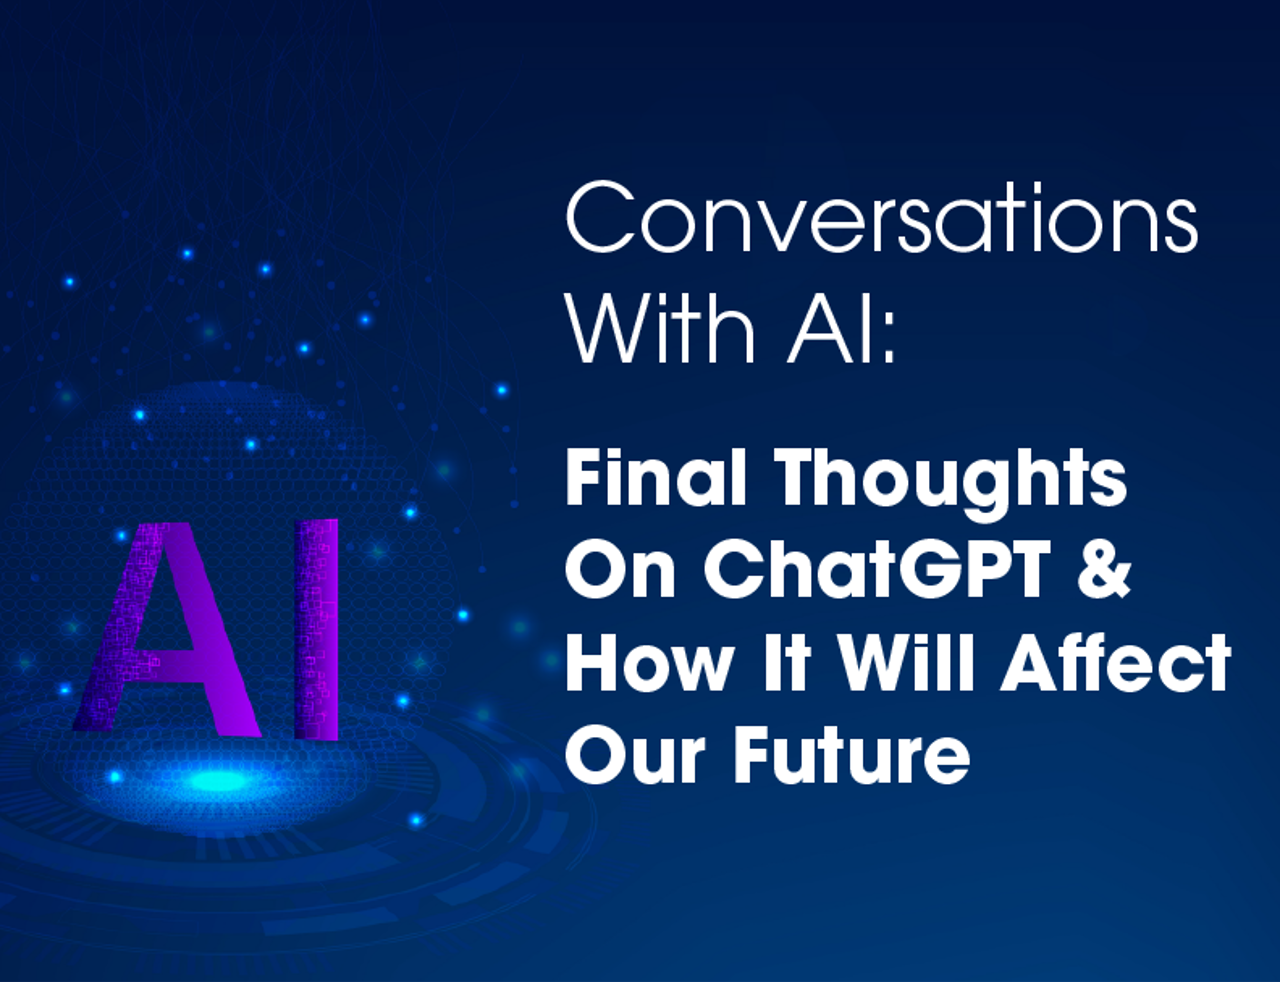 Conversations With AI: Final Thoughts On ChatGPT & How It Will Affect Our Future